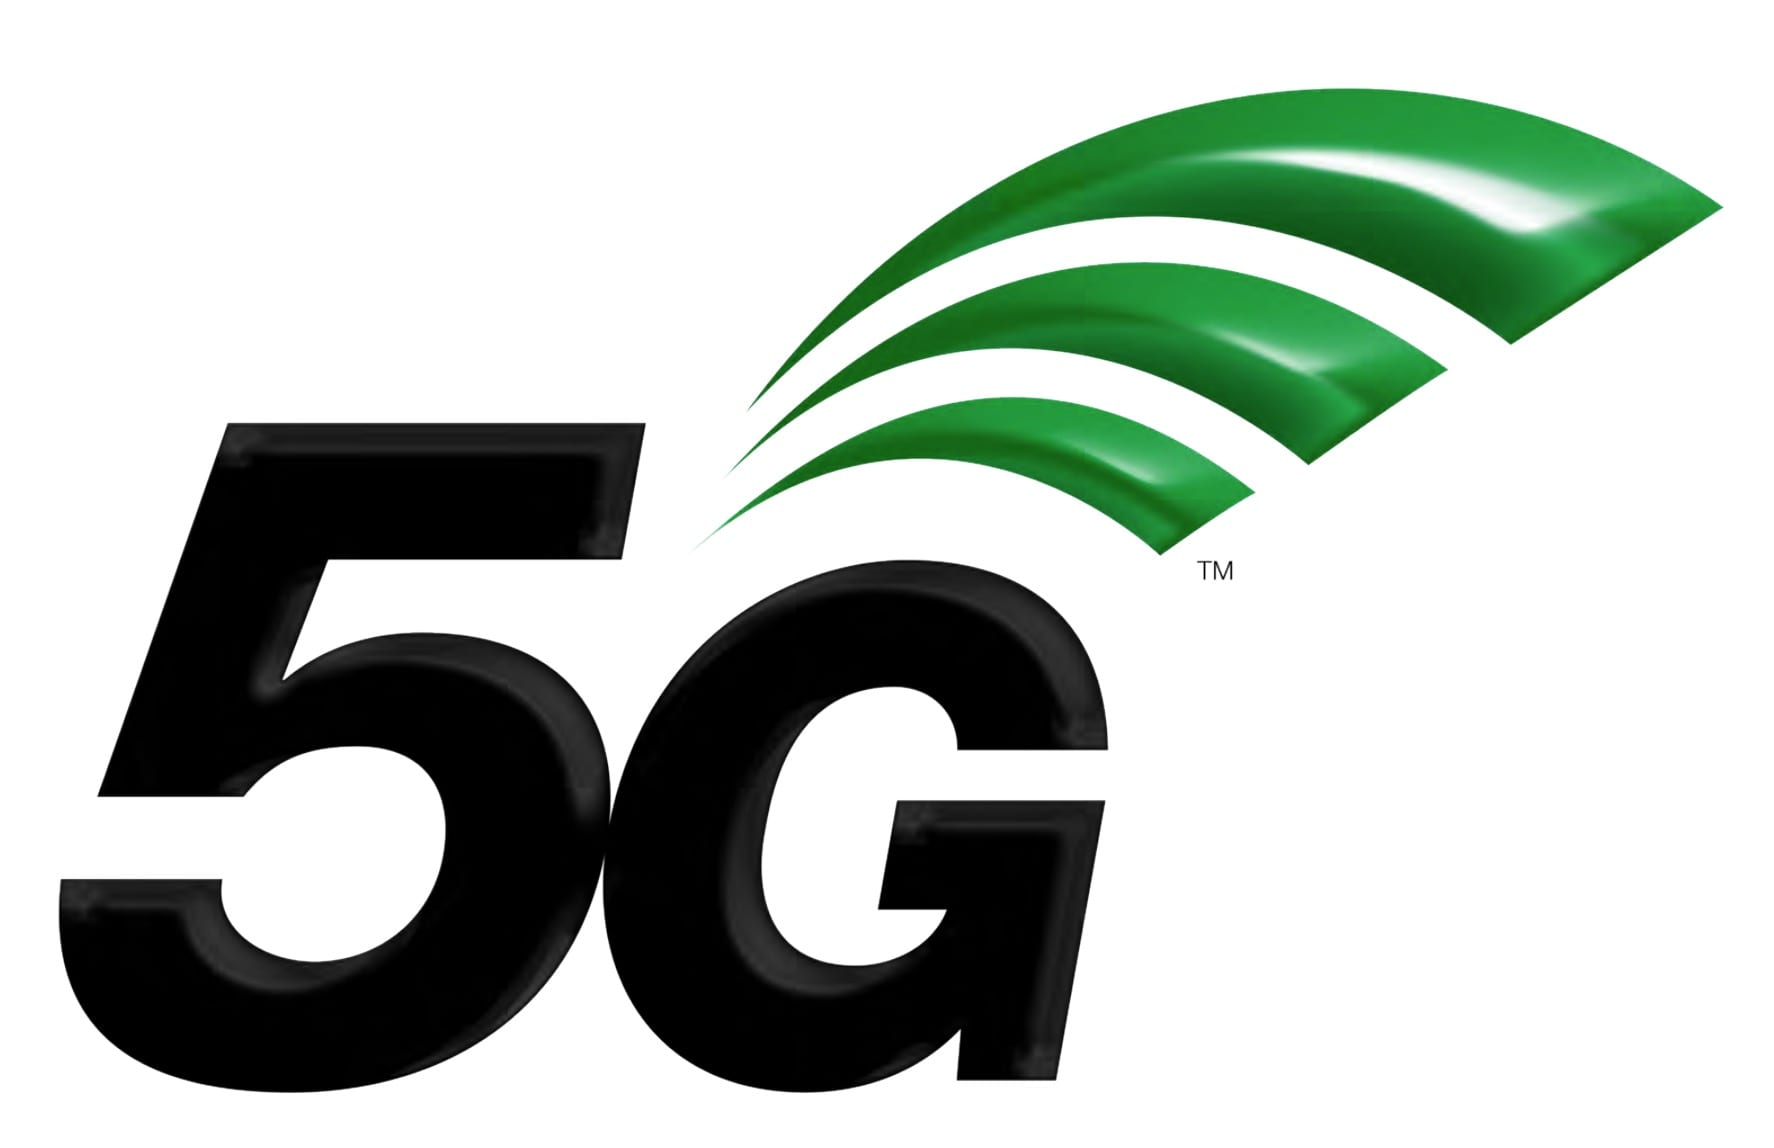 5G is coming to town!